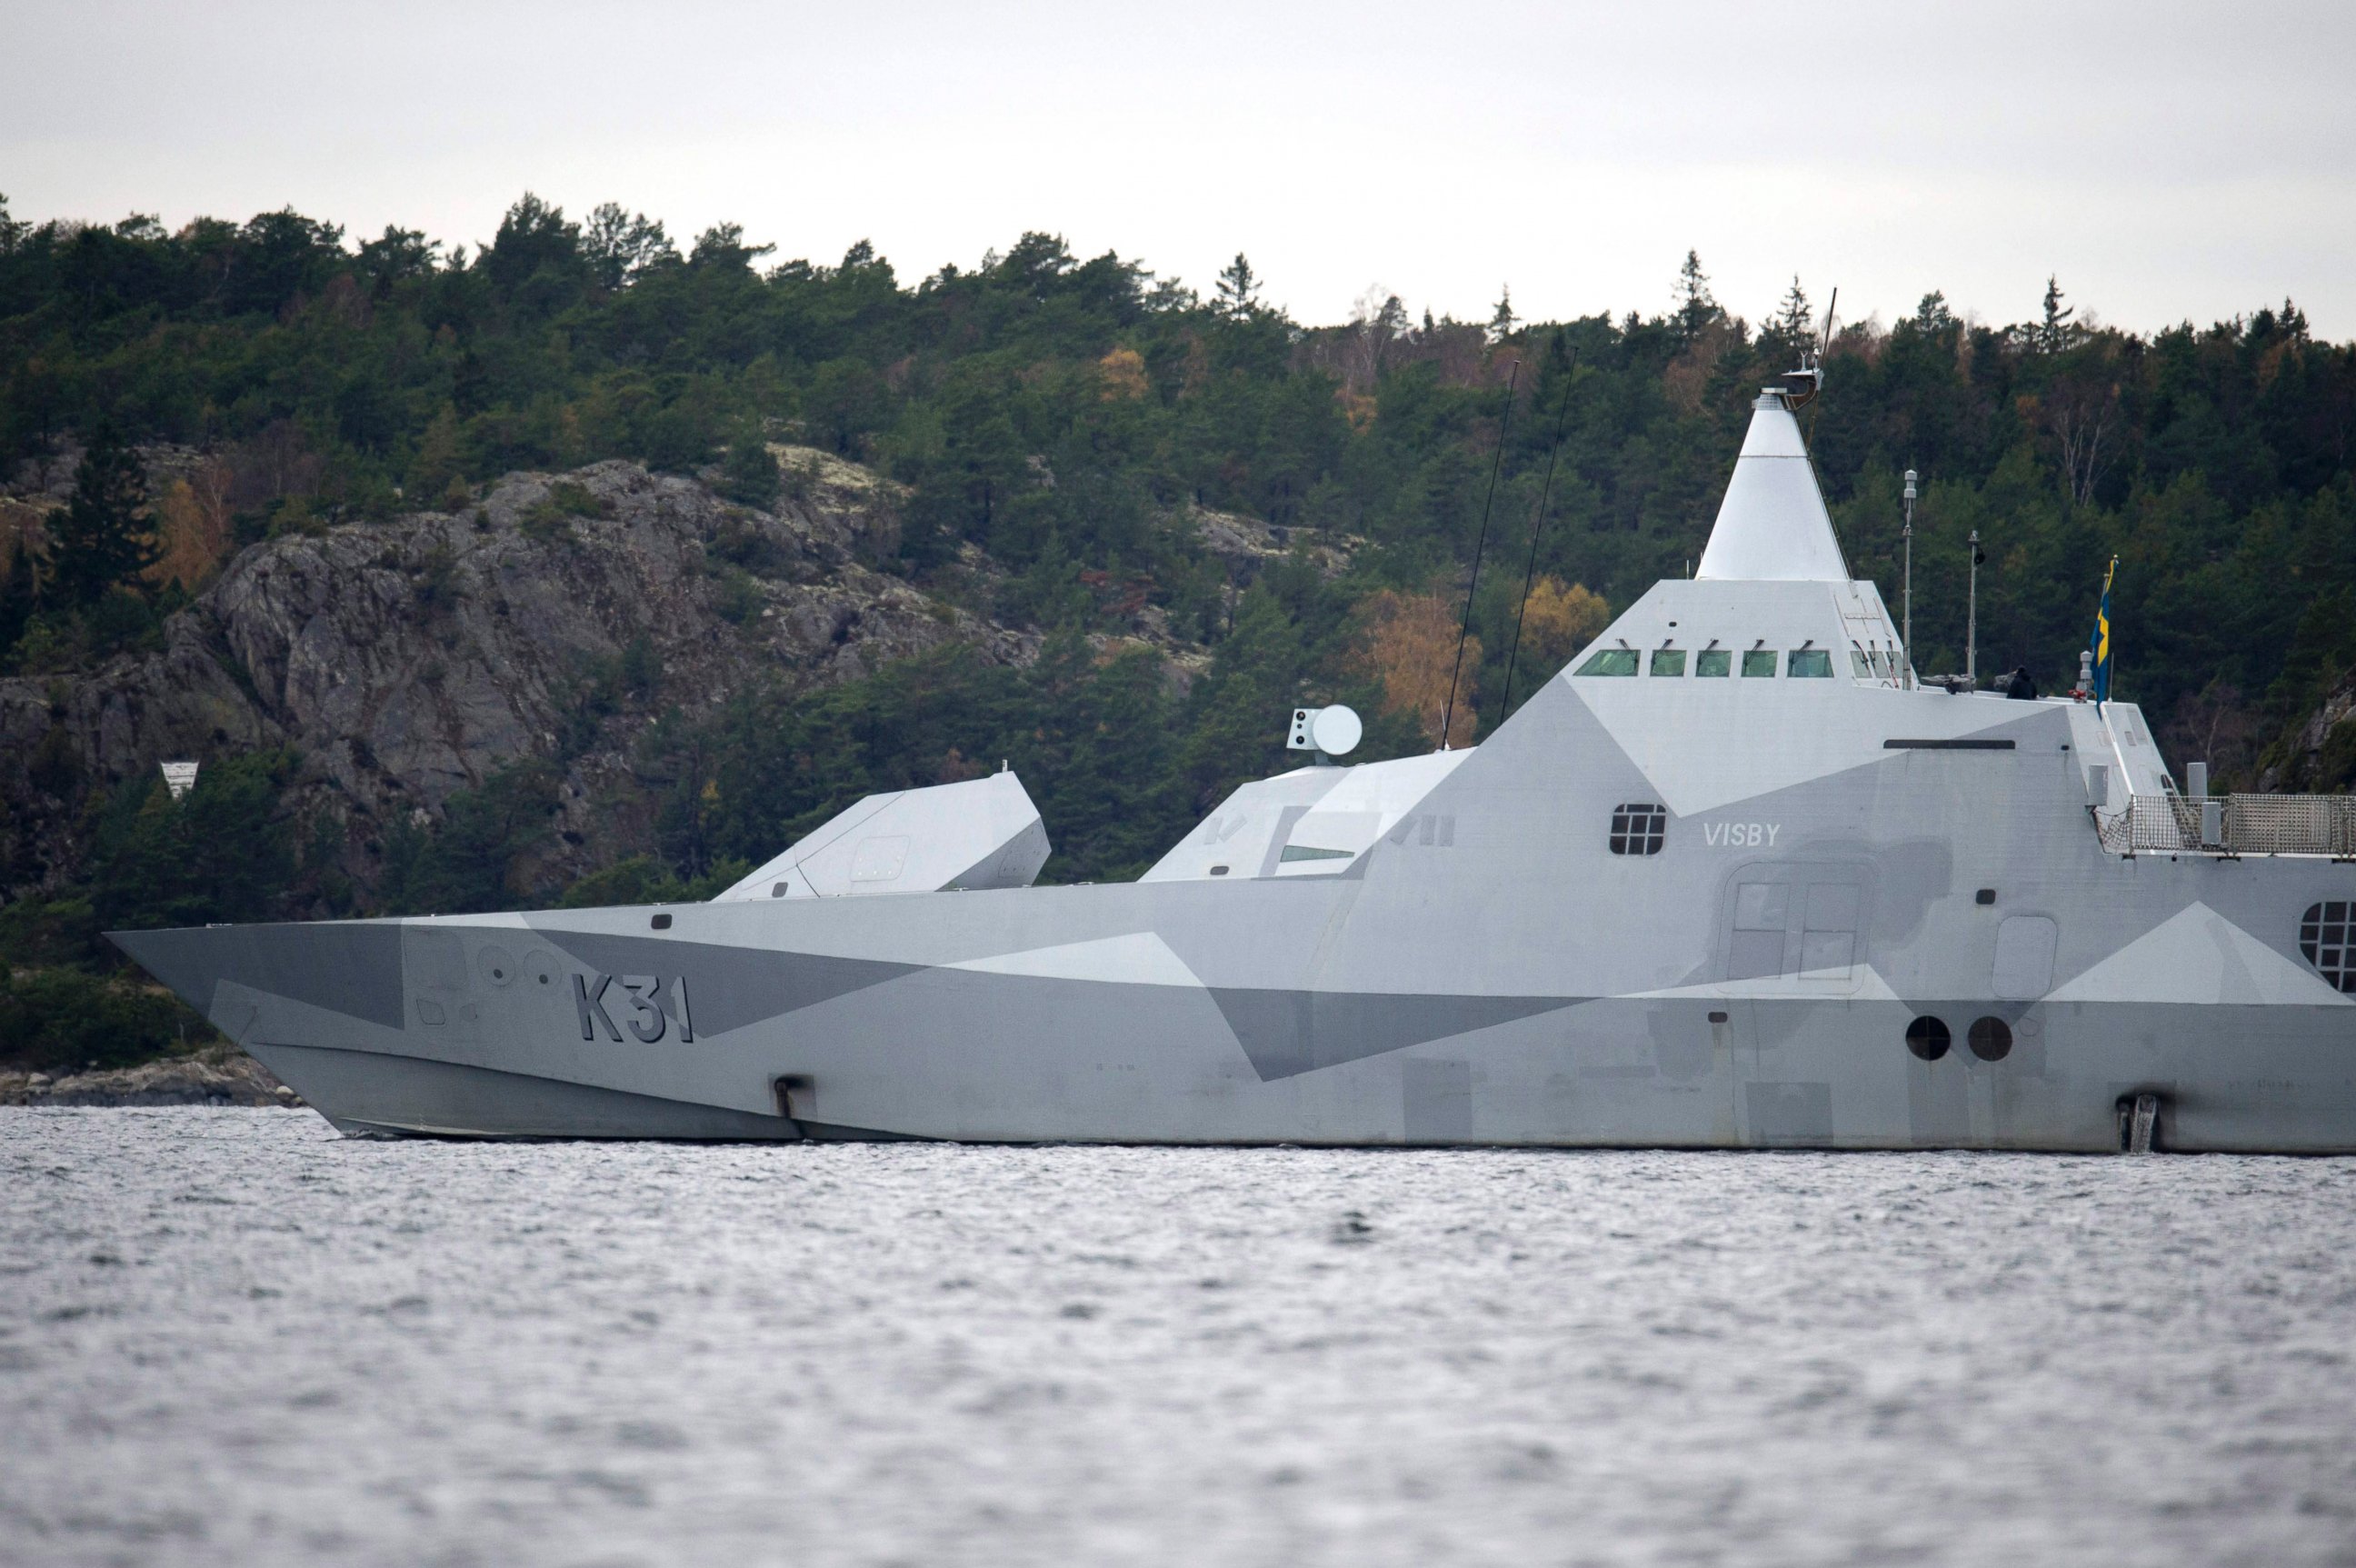 PHOTO: The Swedish corvette HMS Visby navigates on Mysingen Bay, as the search for a suspected foreign vessel enters it's fifth day in the Stockholm archipelago, Tuesday, Oct. 21, 2014.